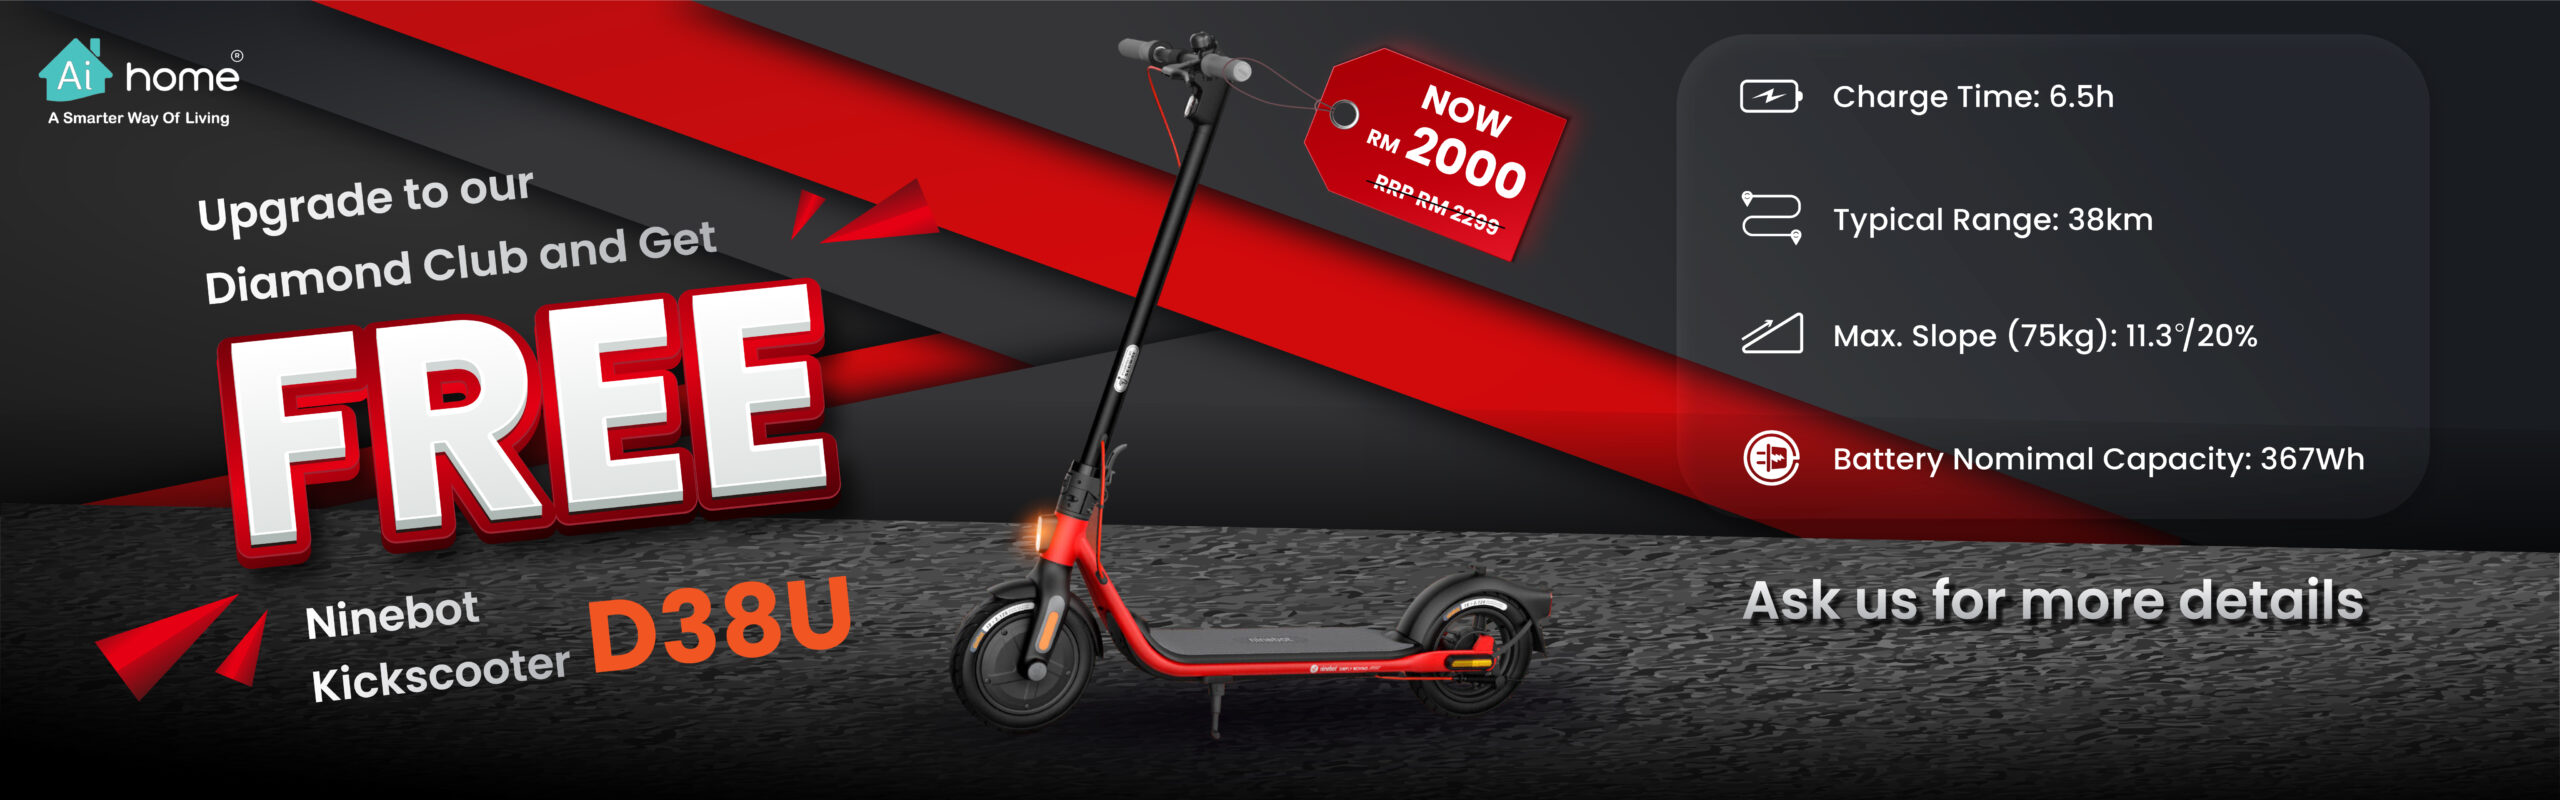 Aihome-Diamond-Club-FREE-Scooter-Banner(1920x600)